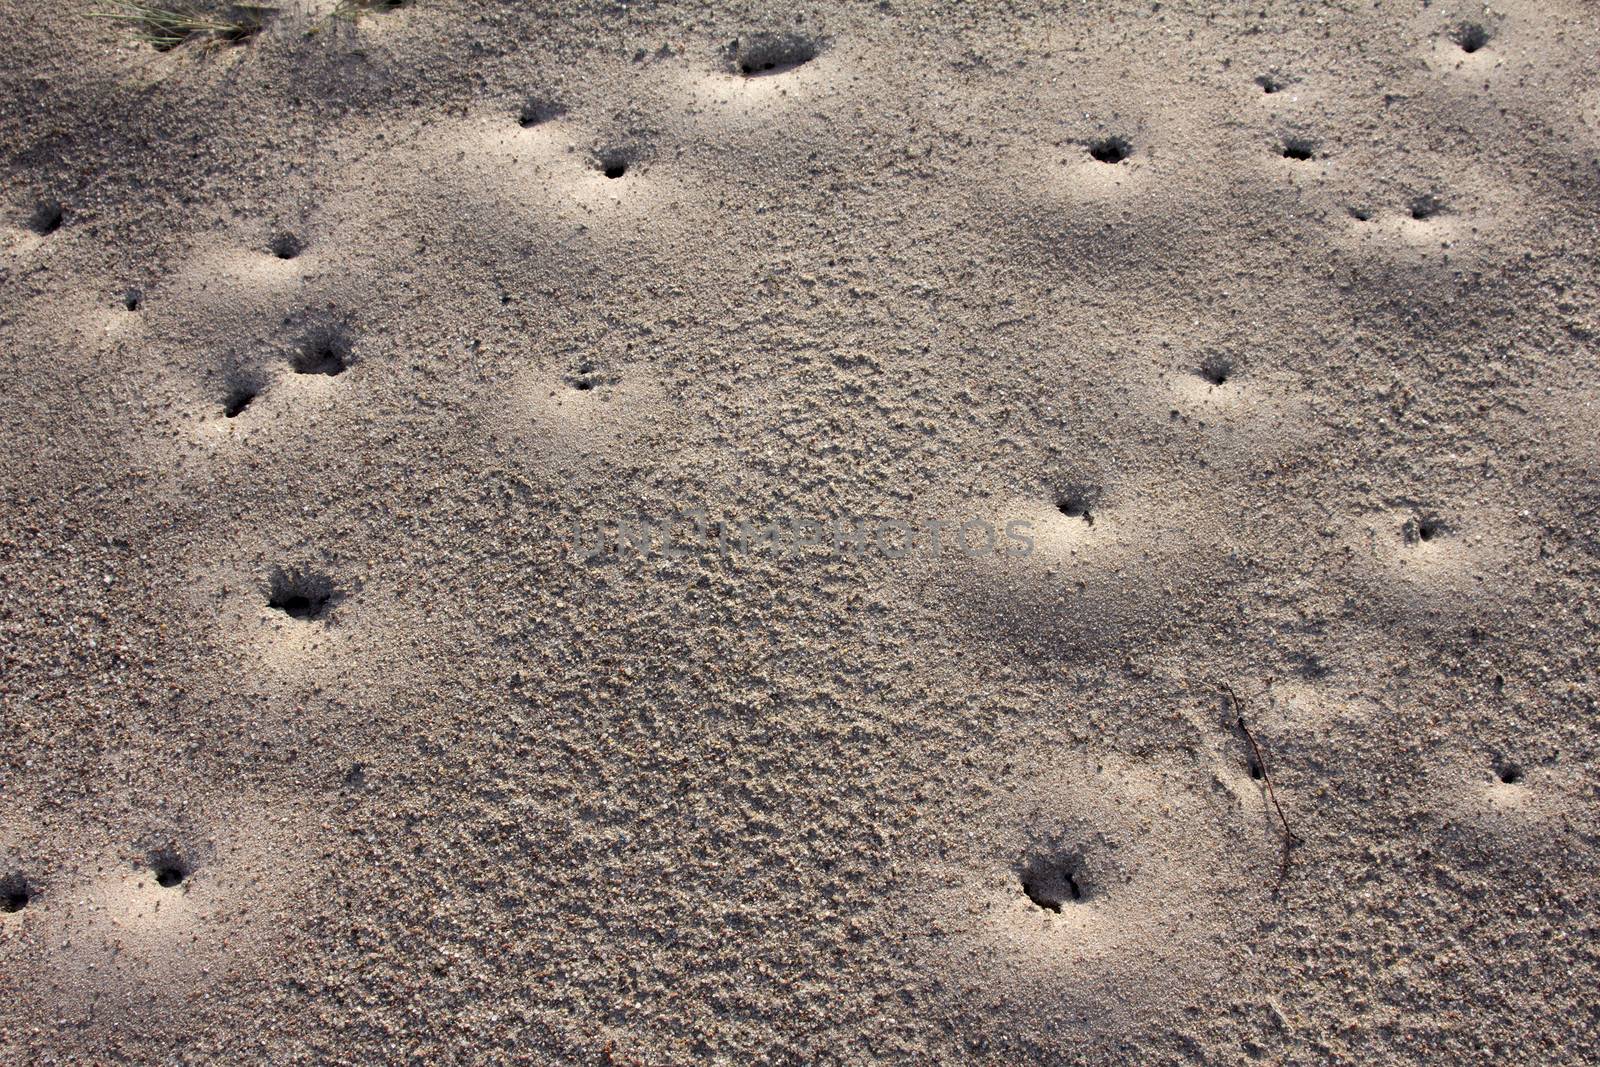 Sand ants by max51288